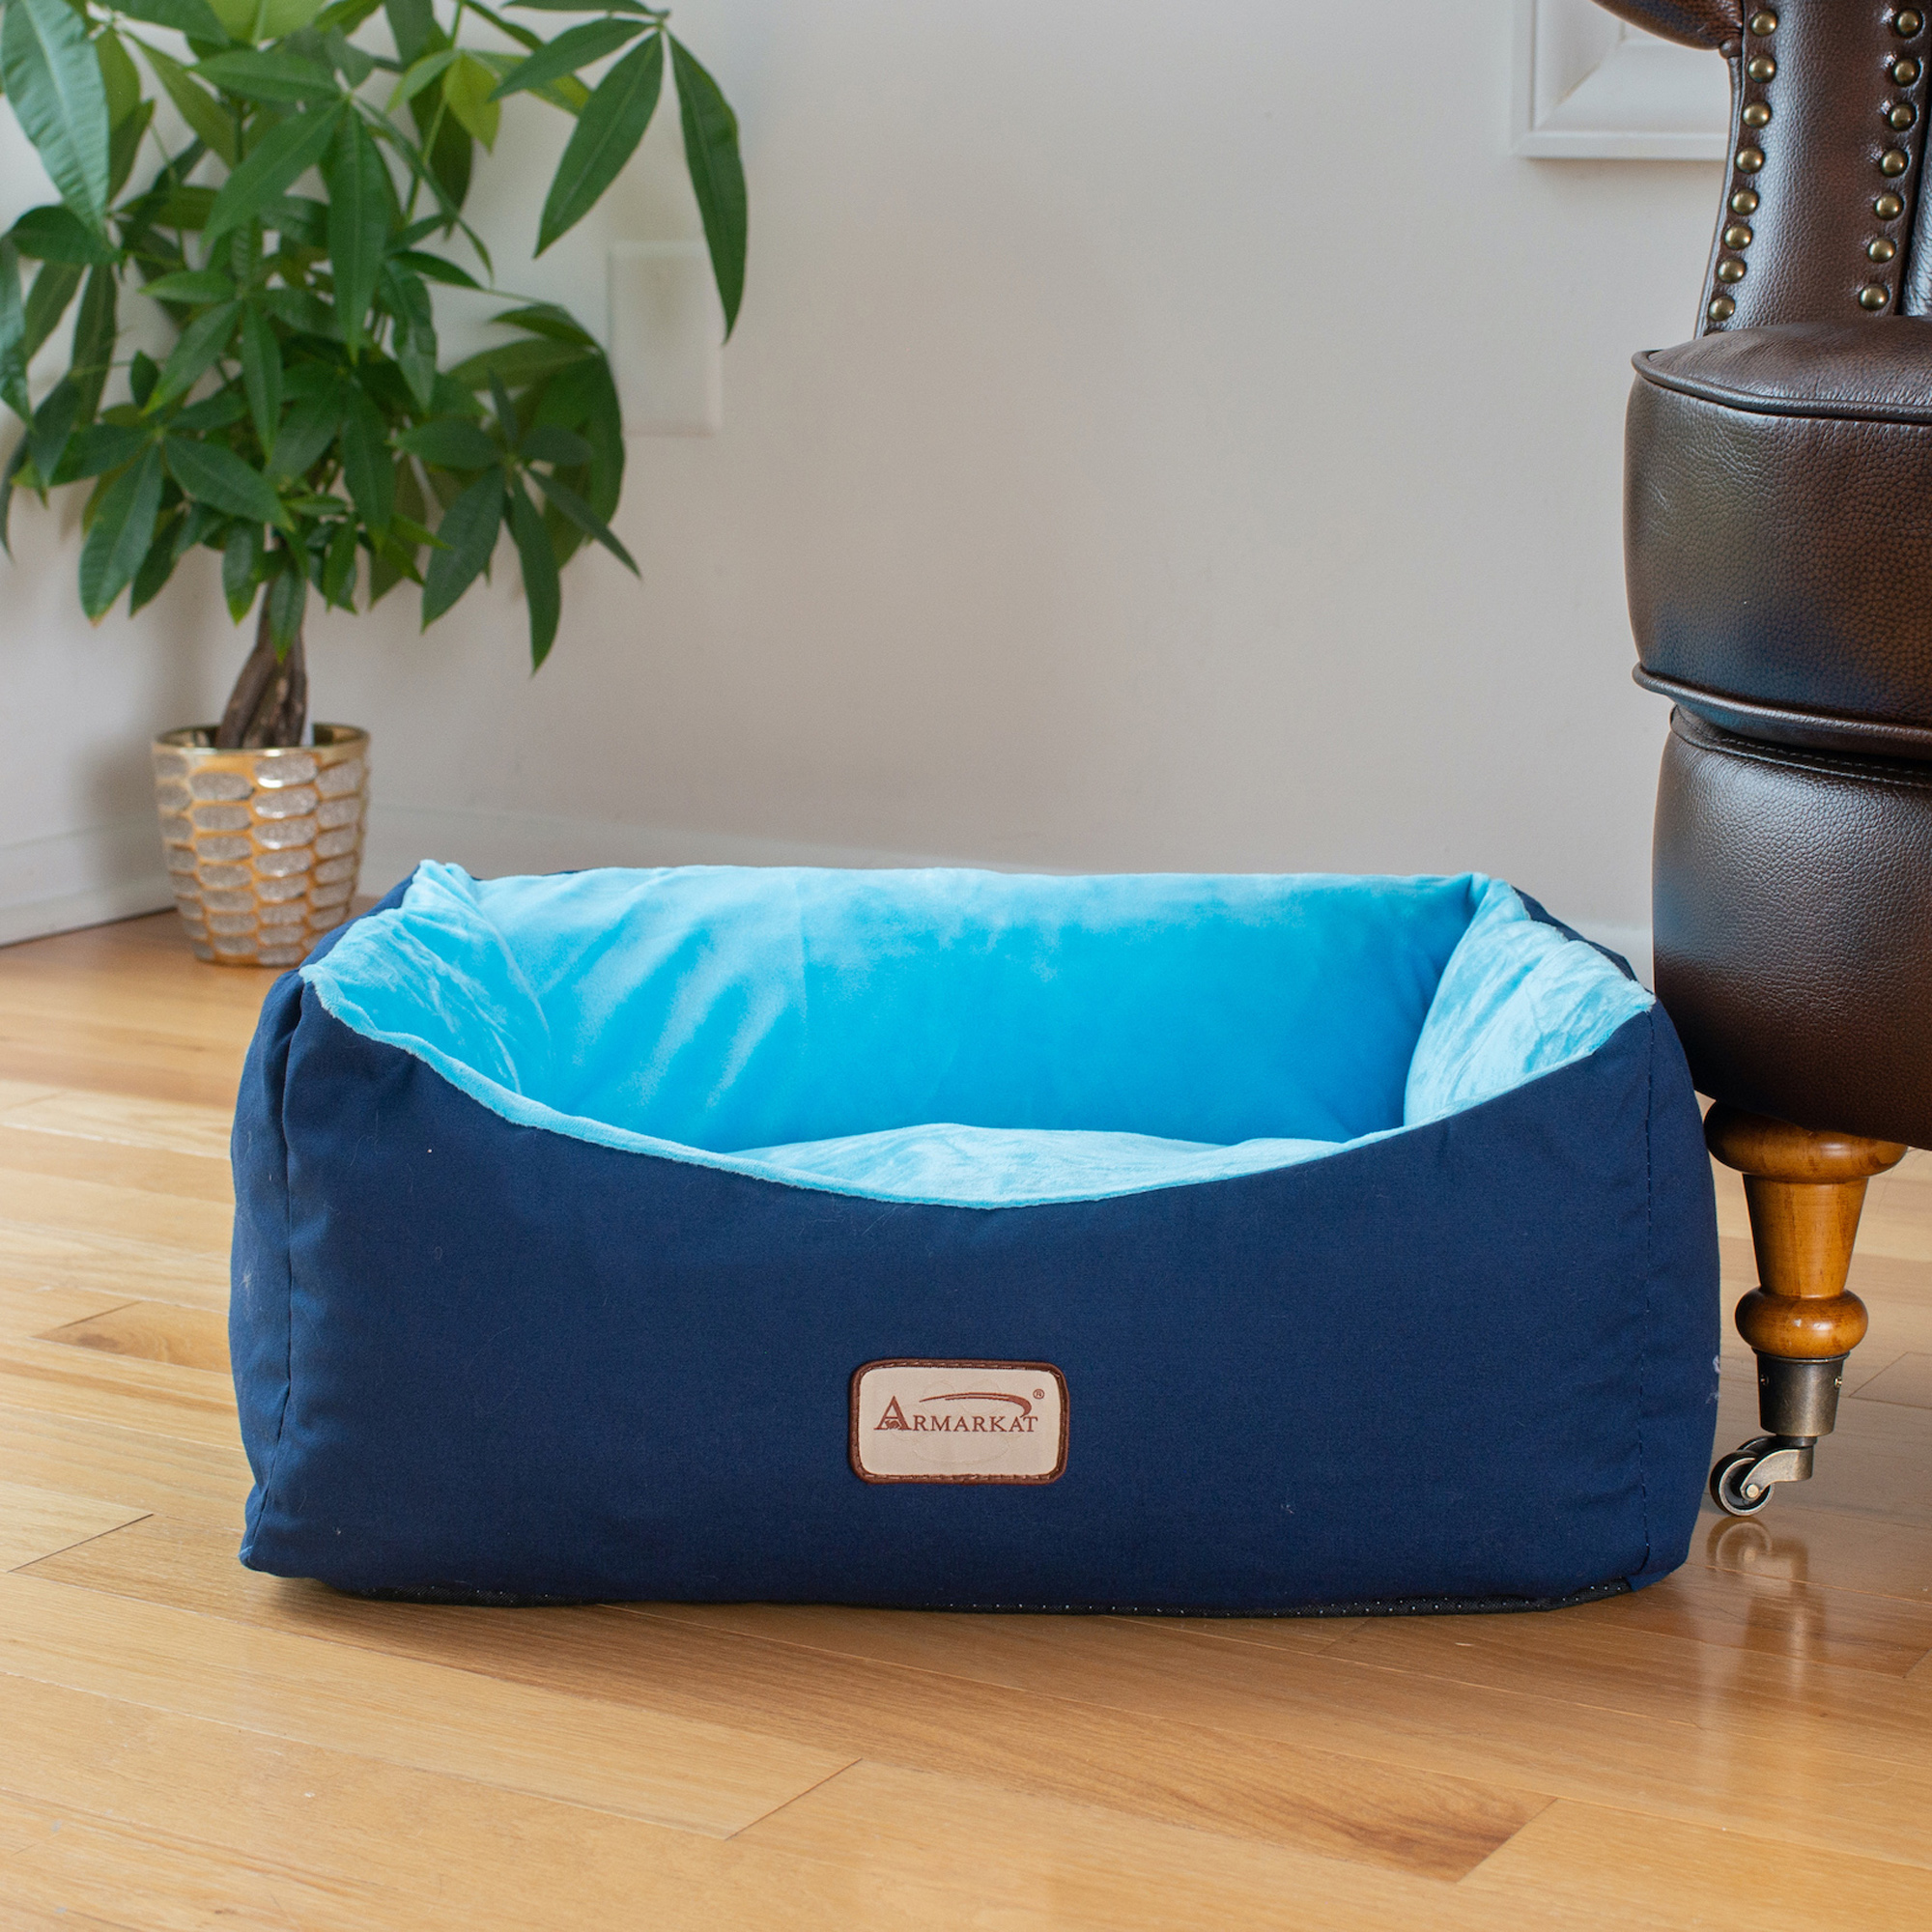 Picture of Aeromark C09HSL-TL Armarkat Pet Bed Cat Bed 18 x 14 x 8 - Navy Blue & Sky Blue